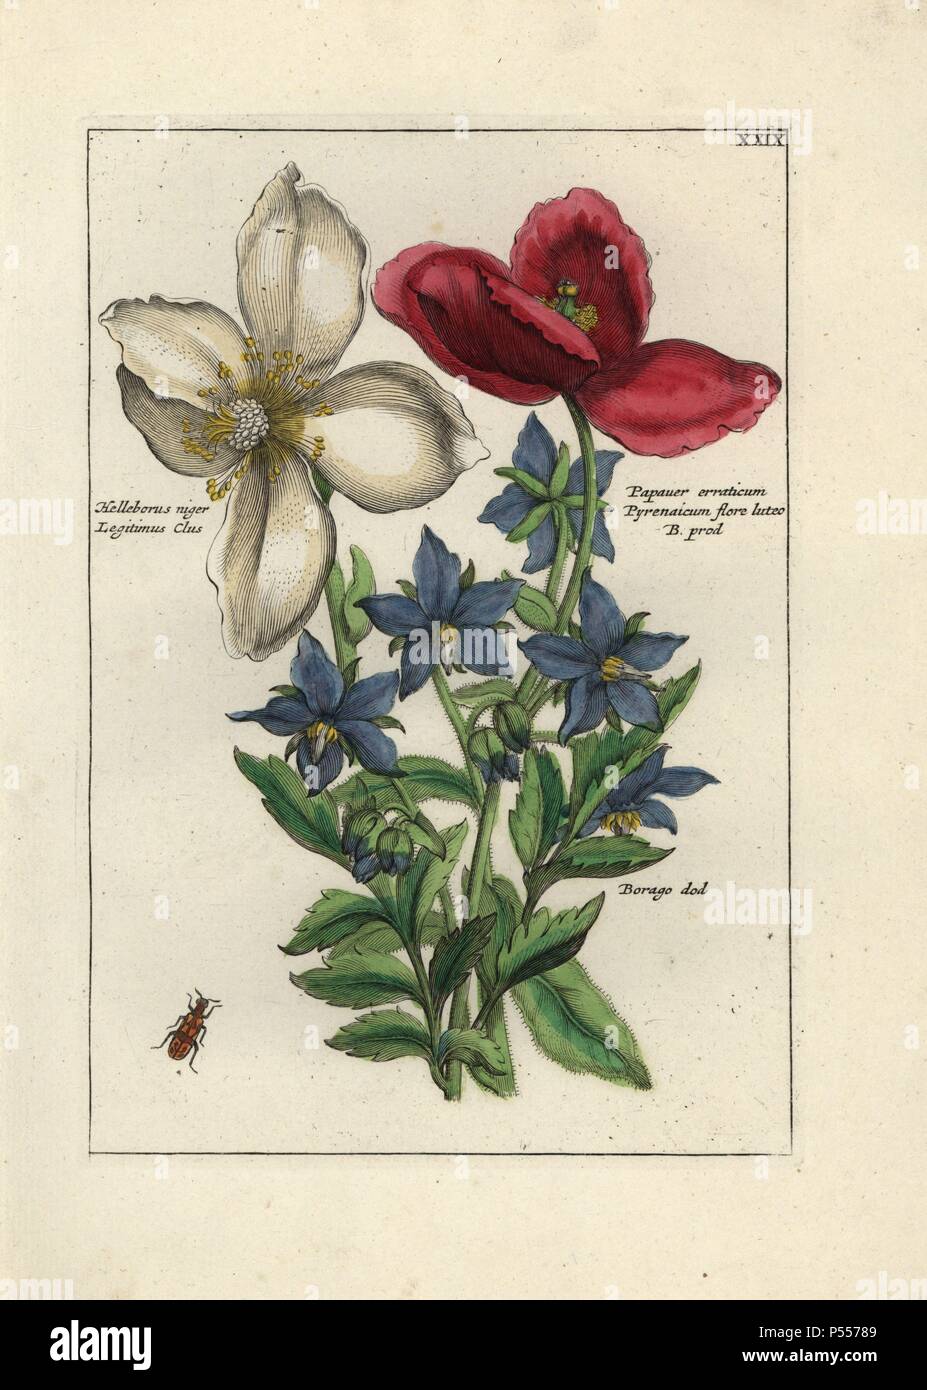 Christmas rose, Helleborus niger Legitimus Clus, and poppy, Papaver erraticum Pyrenaicum flore luteo B. prod, and borage, Borago officinalis, with beetle. Handcoloured copperplate botanical engraving from 'Nederlandsch Bloemwerk' (Dutch Flower Arrangements), Amsterdam, J.B. Elwe, 1794. Illustration copied from a work by one of the outstanding French flower painters of the 17th century, Nicolas Robert (1614-1685), entitled 'Variae ac multiformes florum species.. Diverses fleurs,' Paris, 1660. Stock Photo